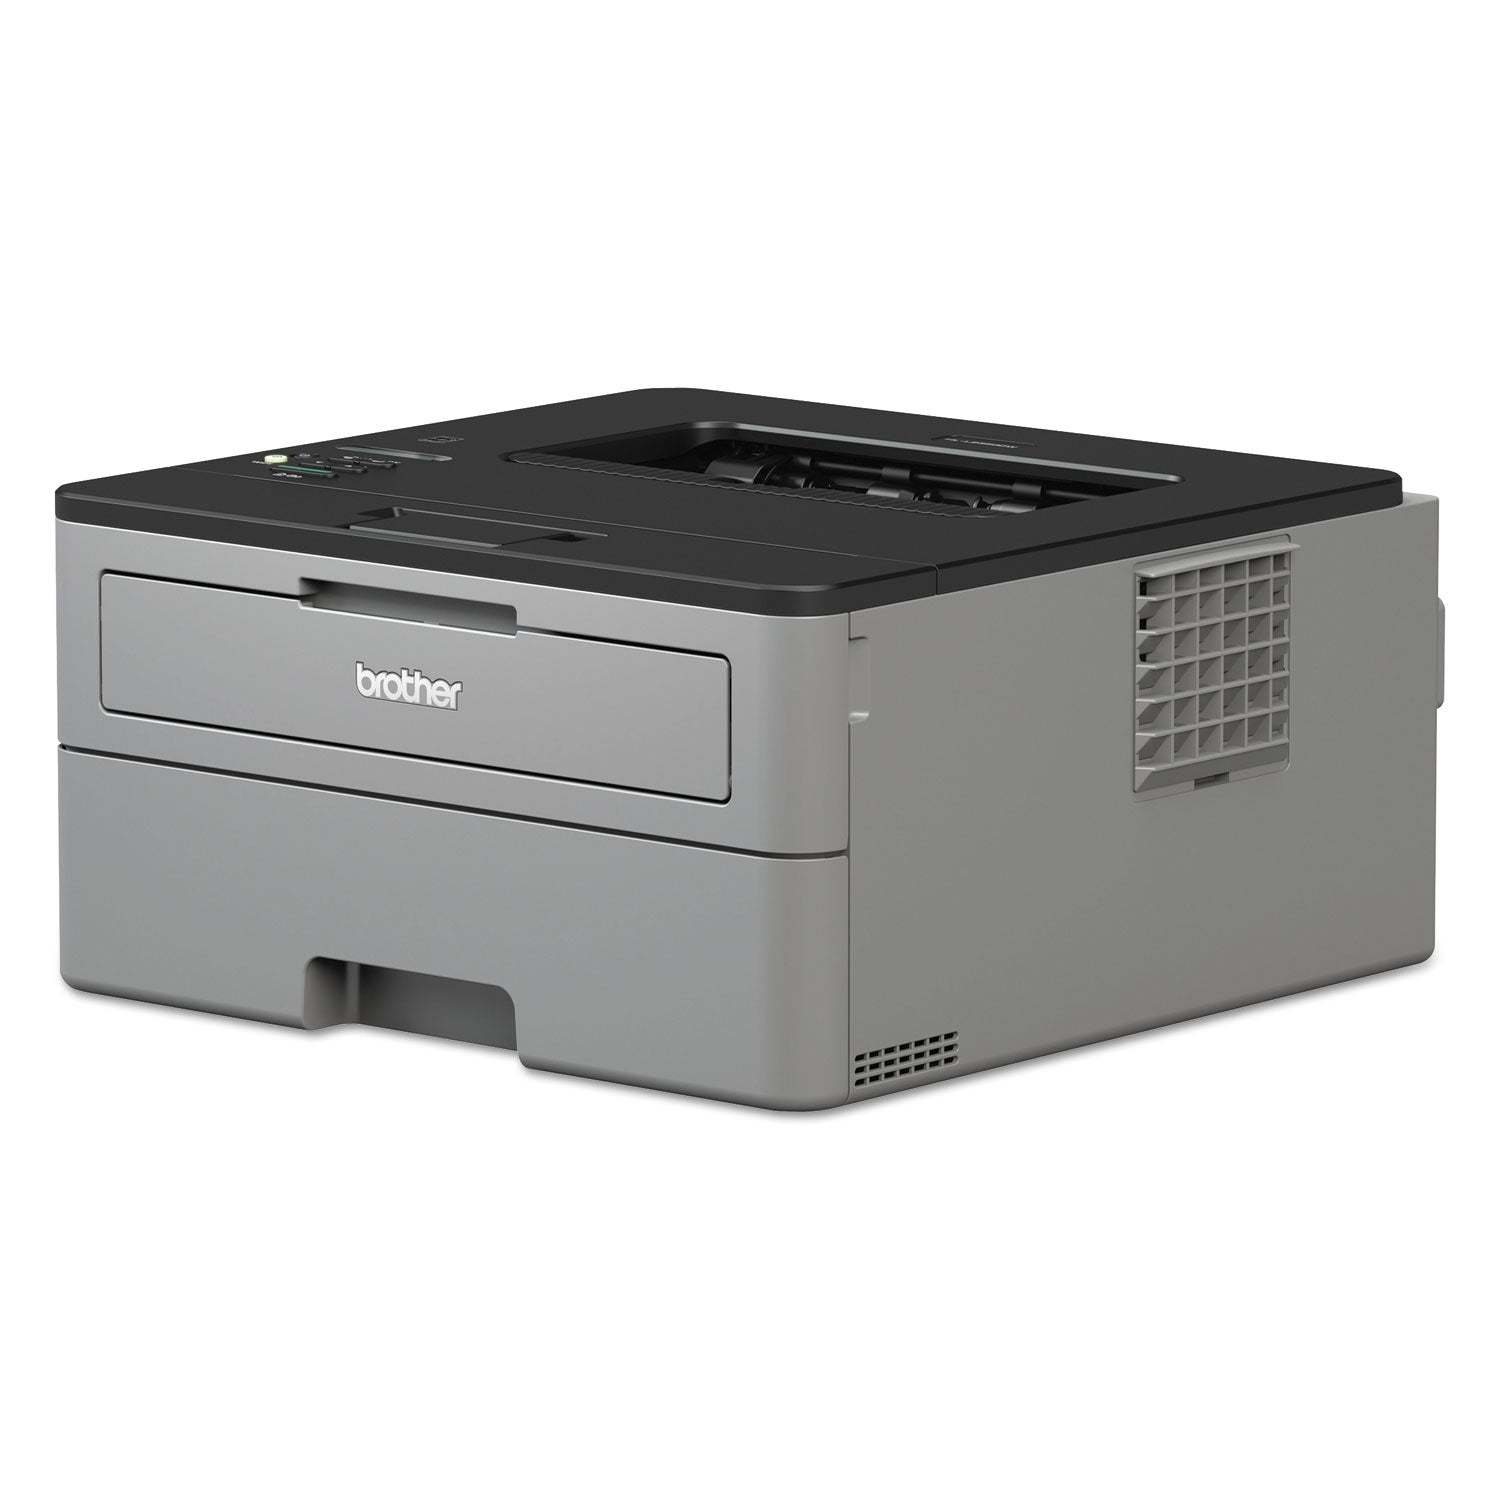 hll2350dw-monochrome-compact-laser-printer-with-wireless-and-duplex-printing_brthll2350dw - 2